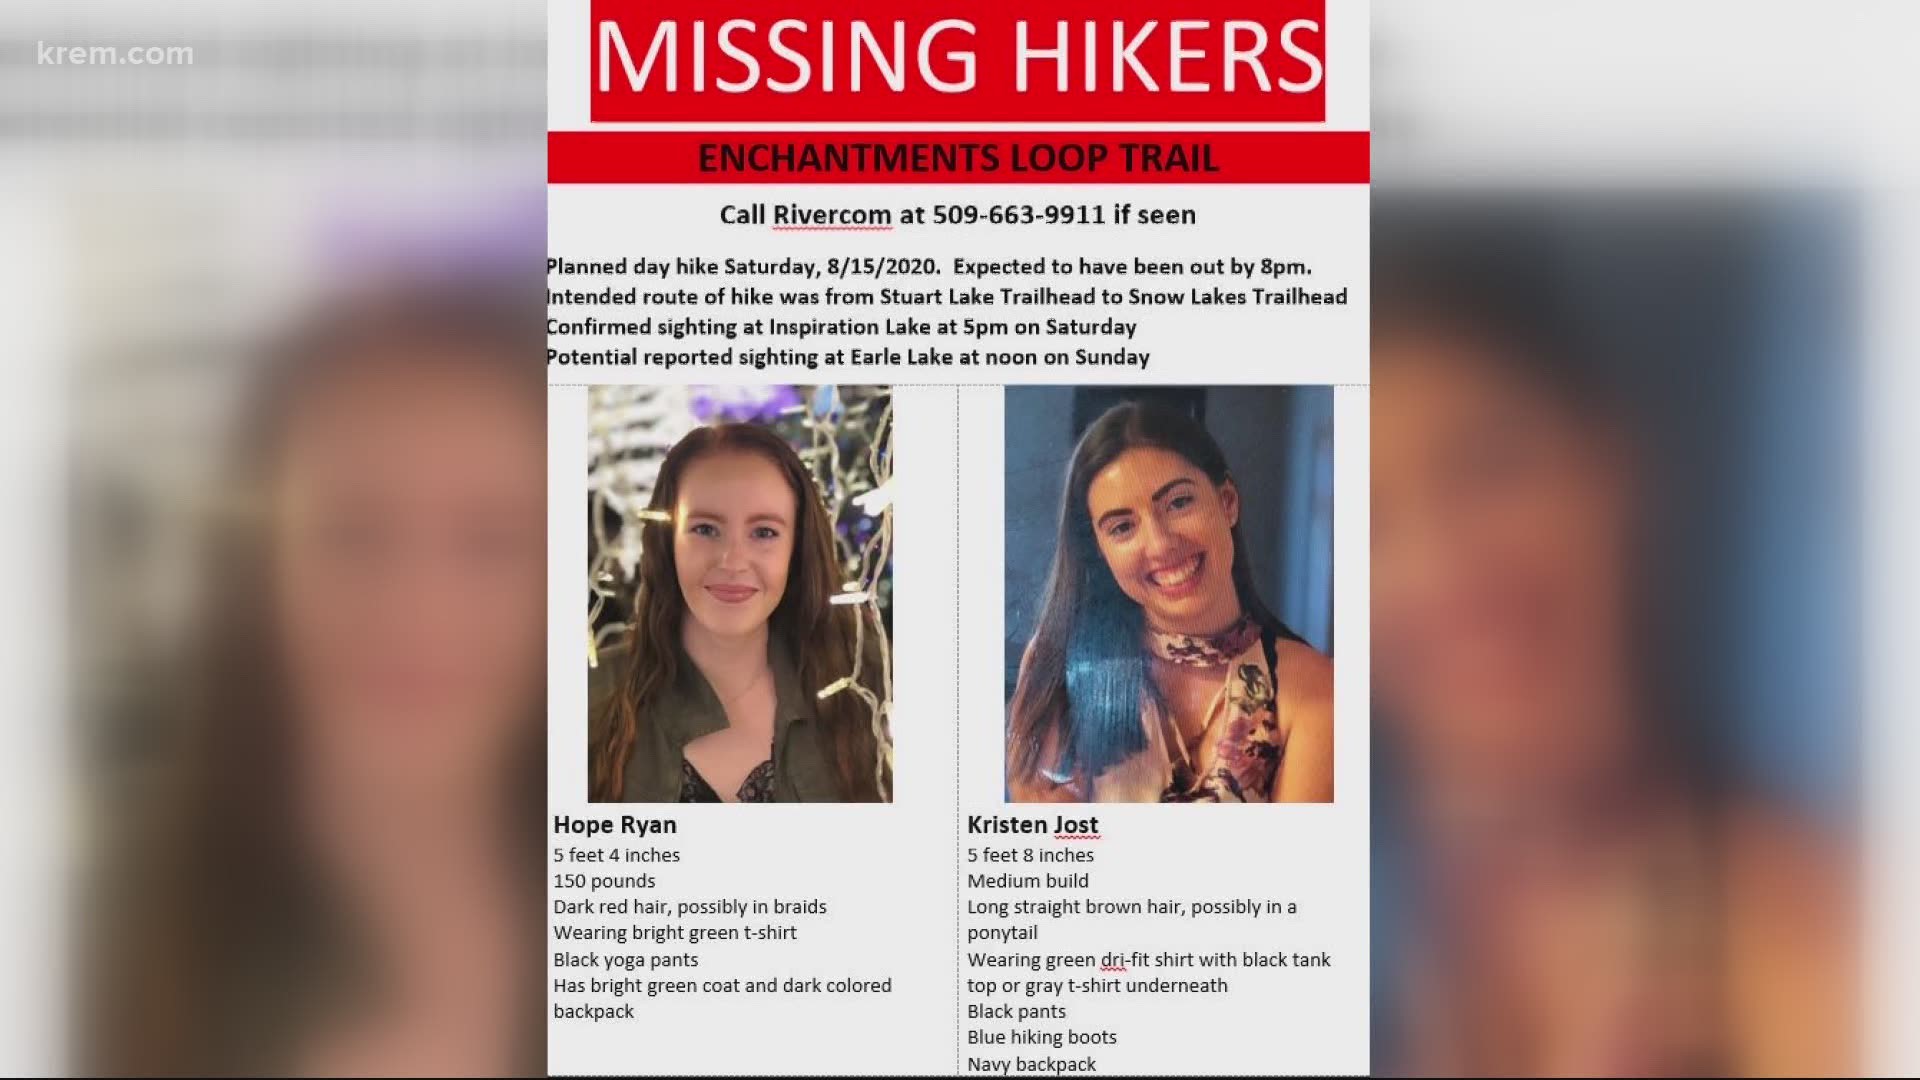 Two missing hikers on Enchantments Loop Trail have been found